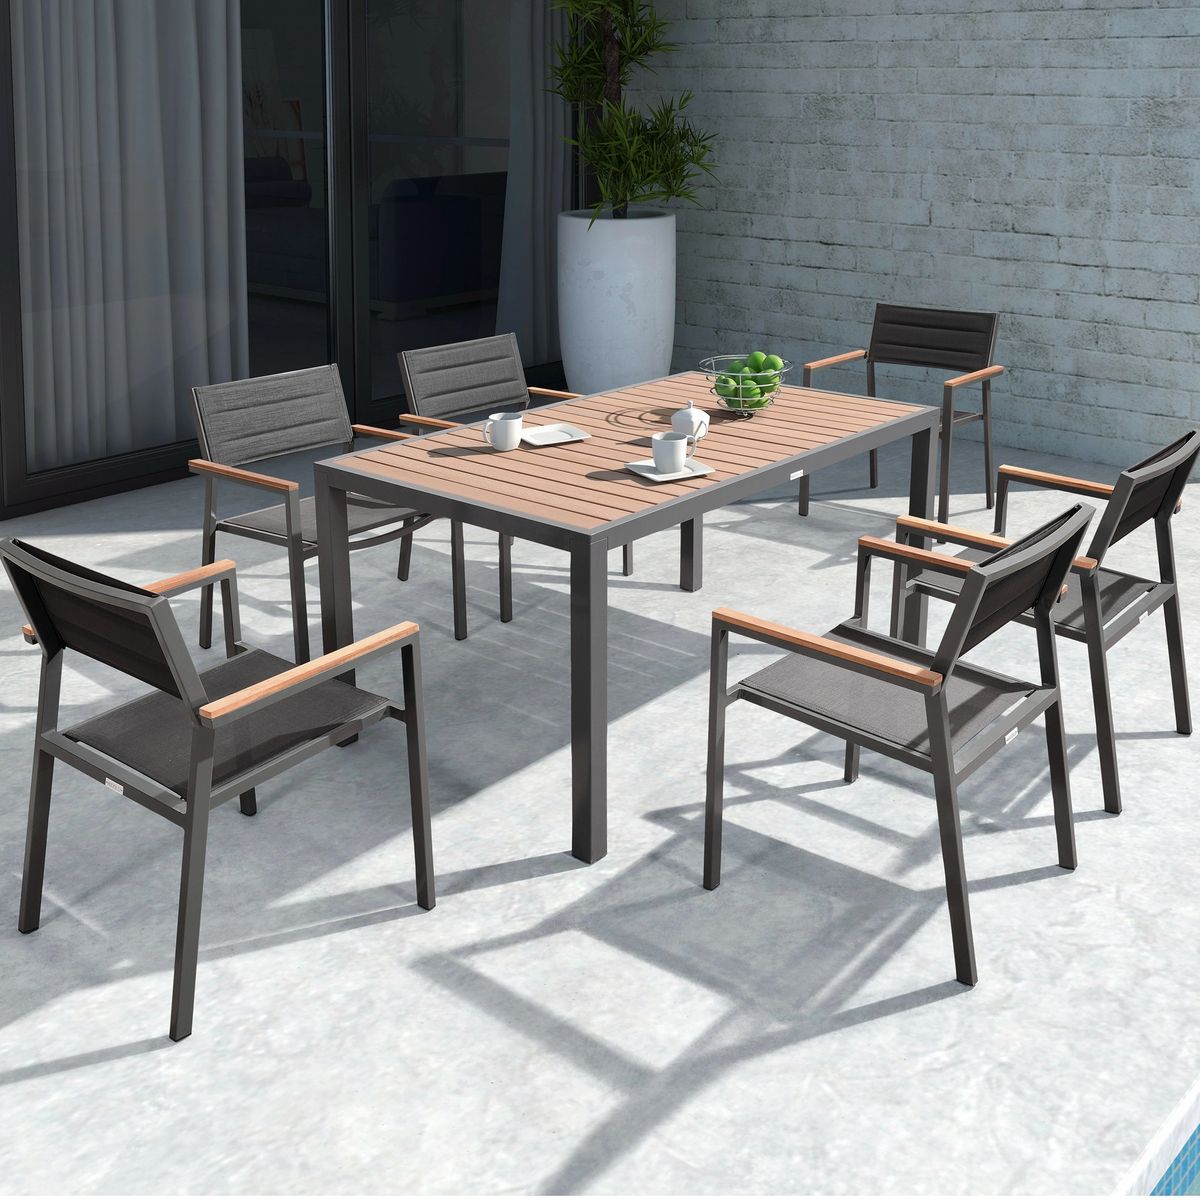 Auto Aluminum Outdoor Dining Set for 6 - Series 6476